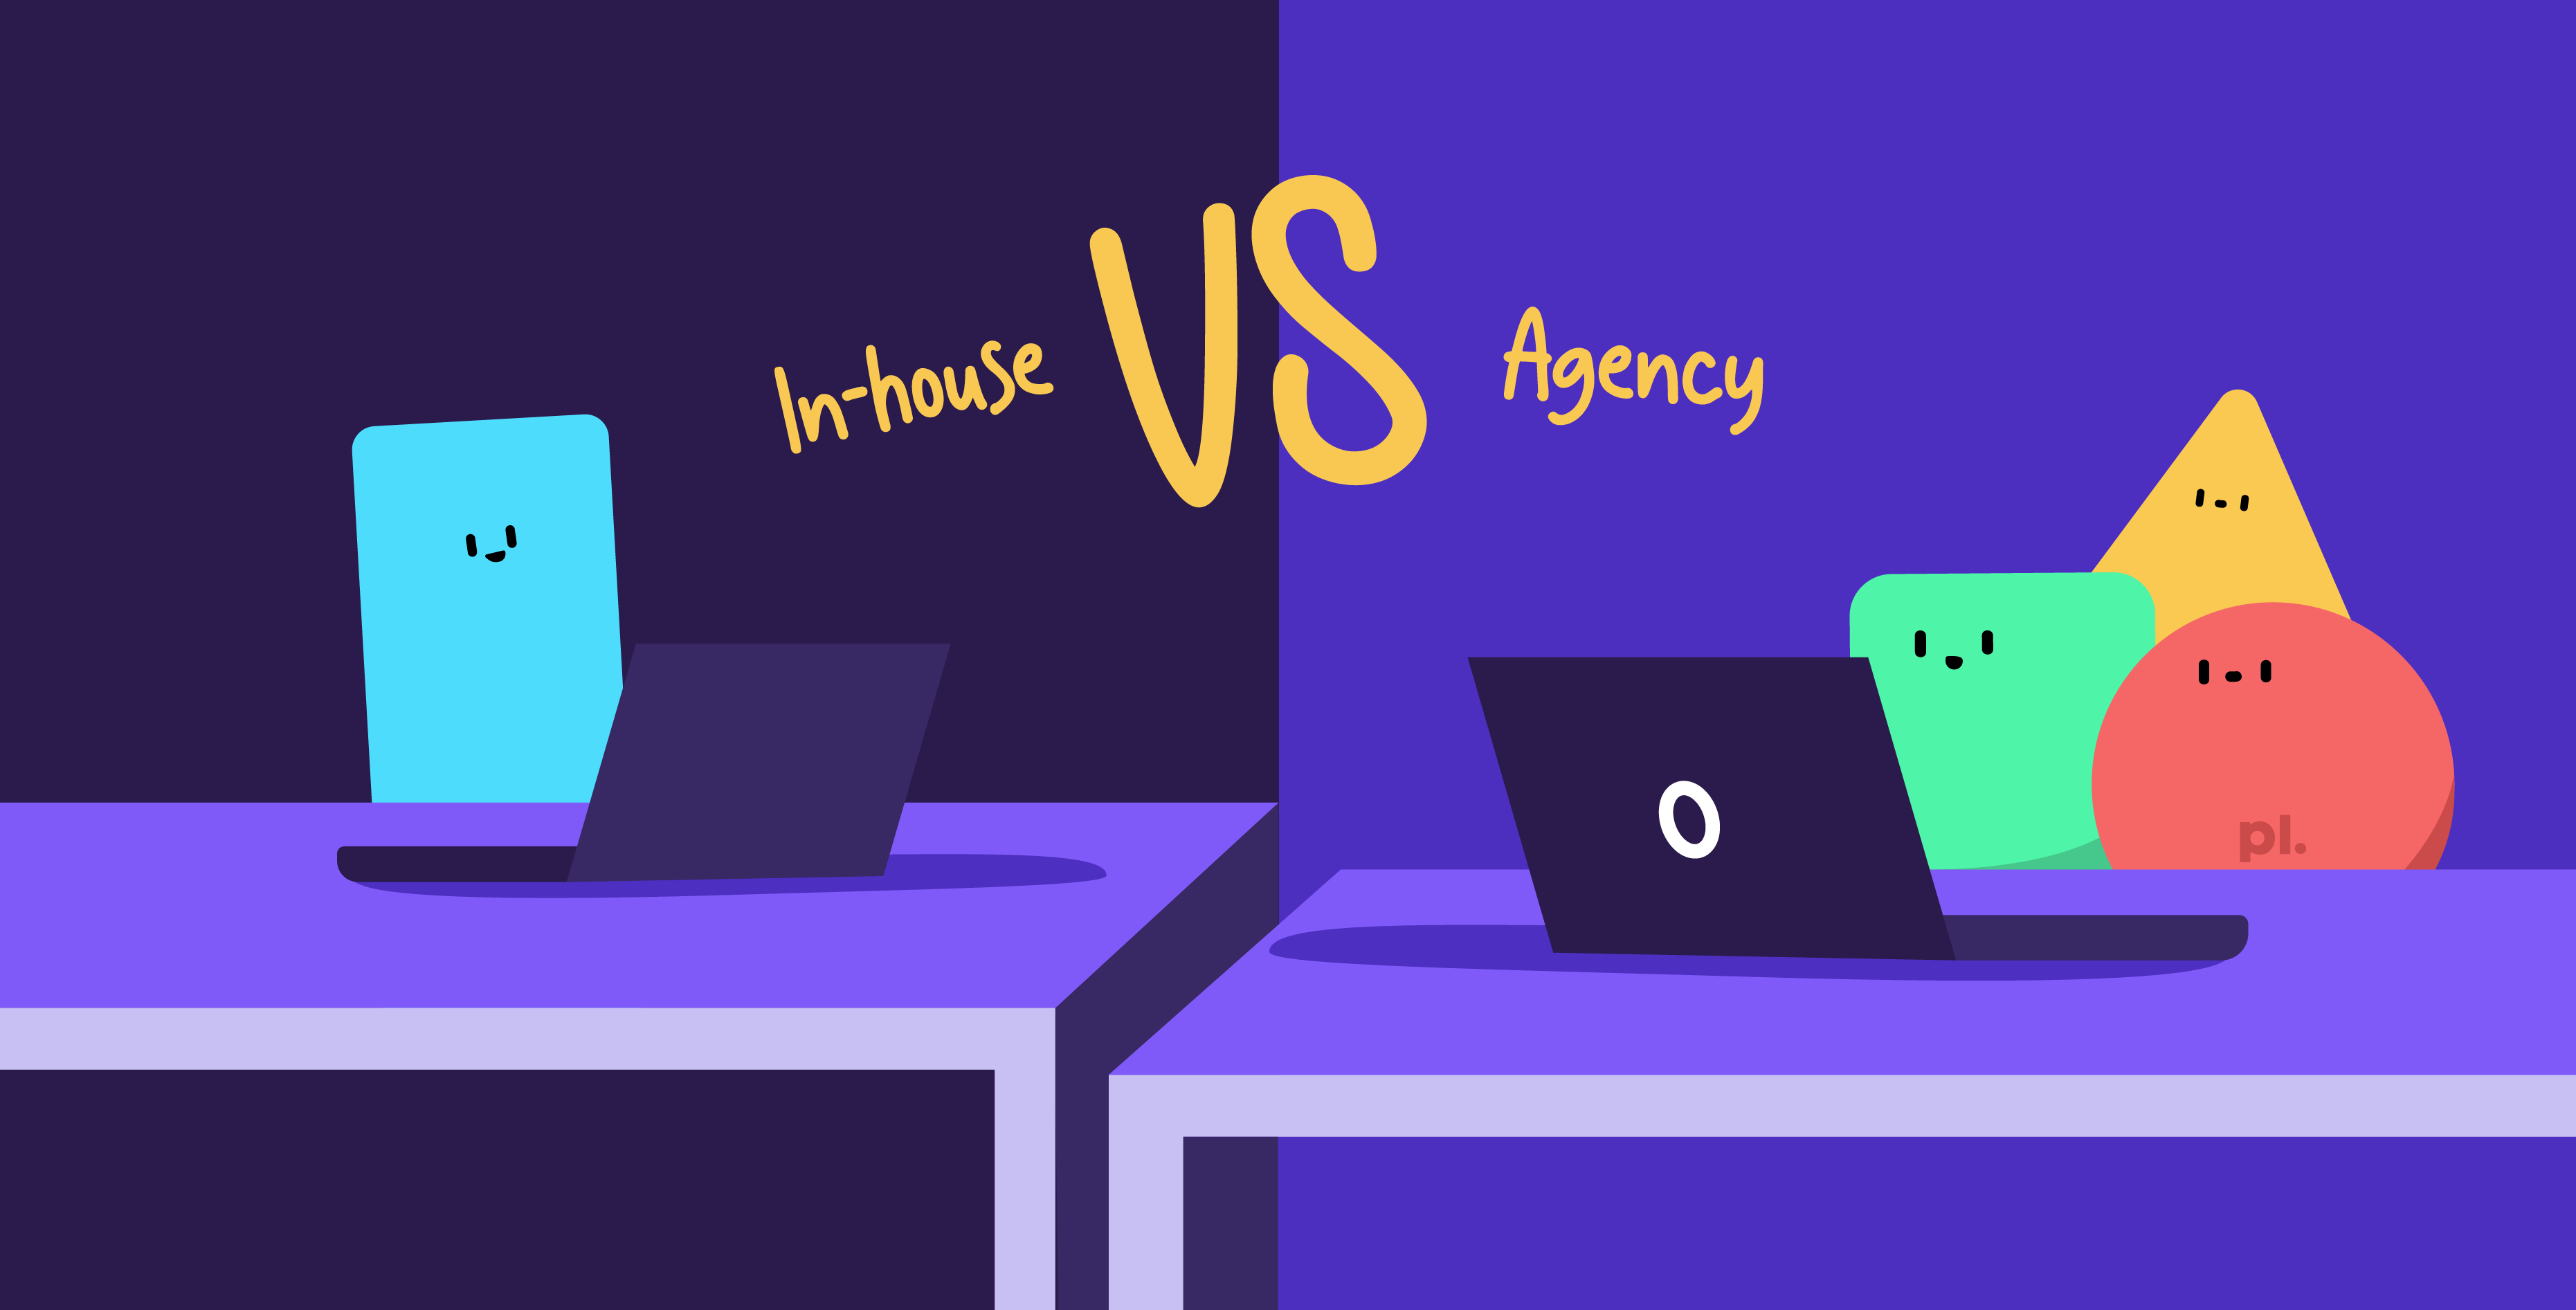 Agency vs in-house design, which is best for you?